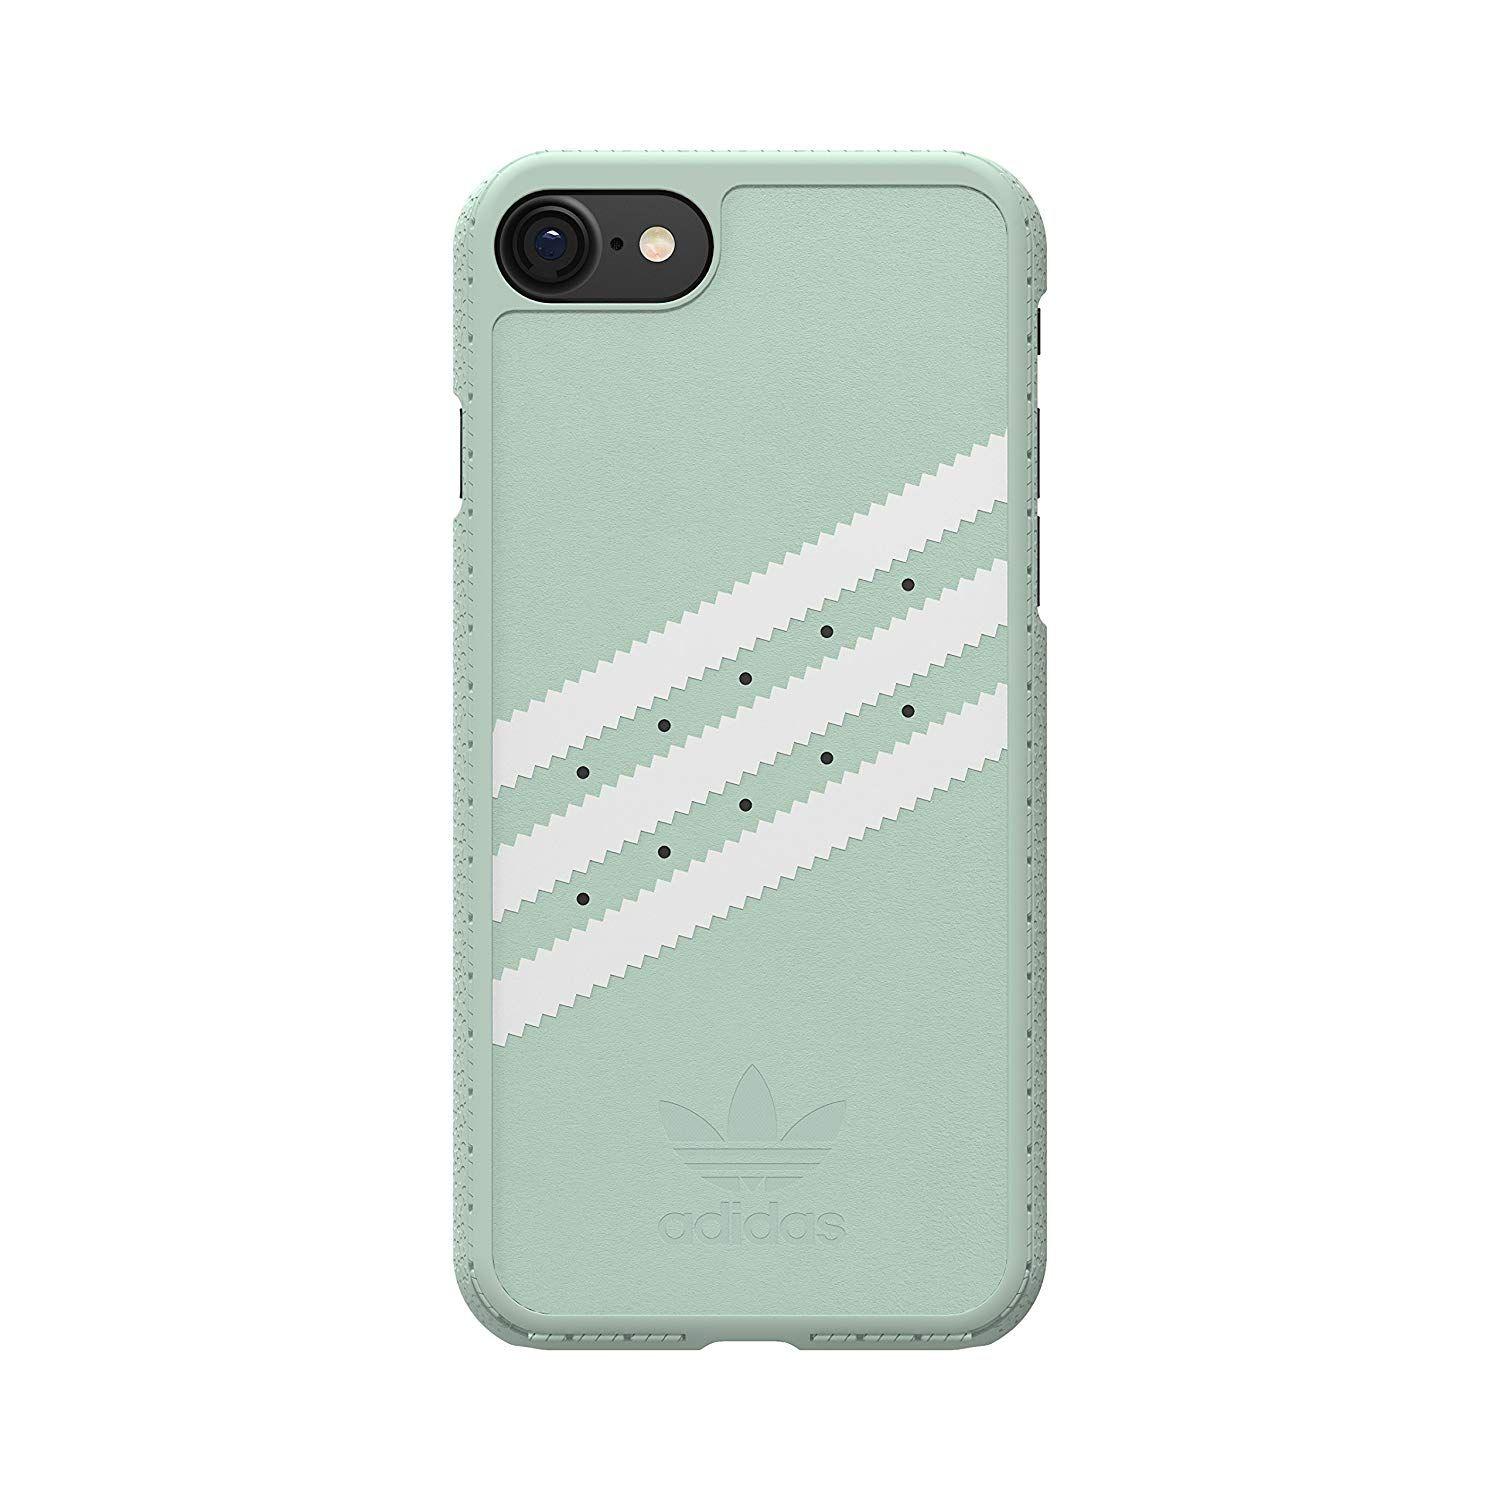 White and Green Phone Logo - Amazon.com: adidas Cell Phone Case for Apple iPhone 7 - Light Green ...